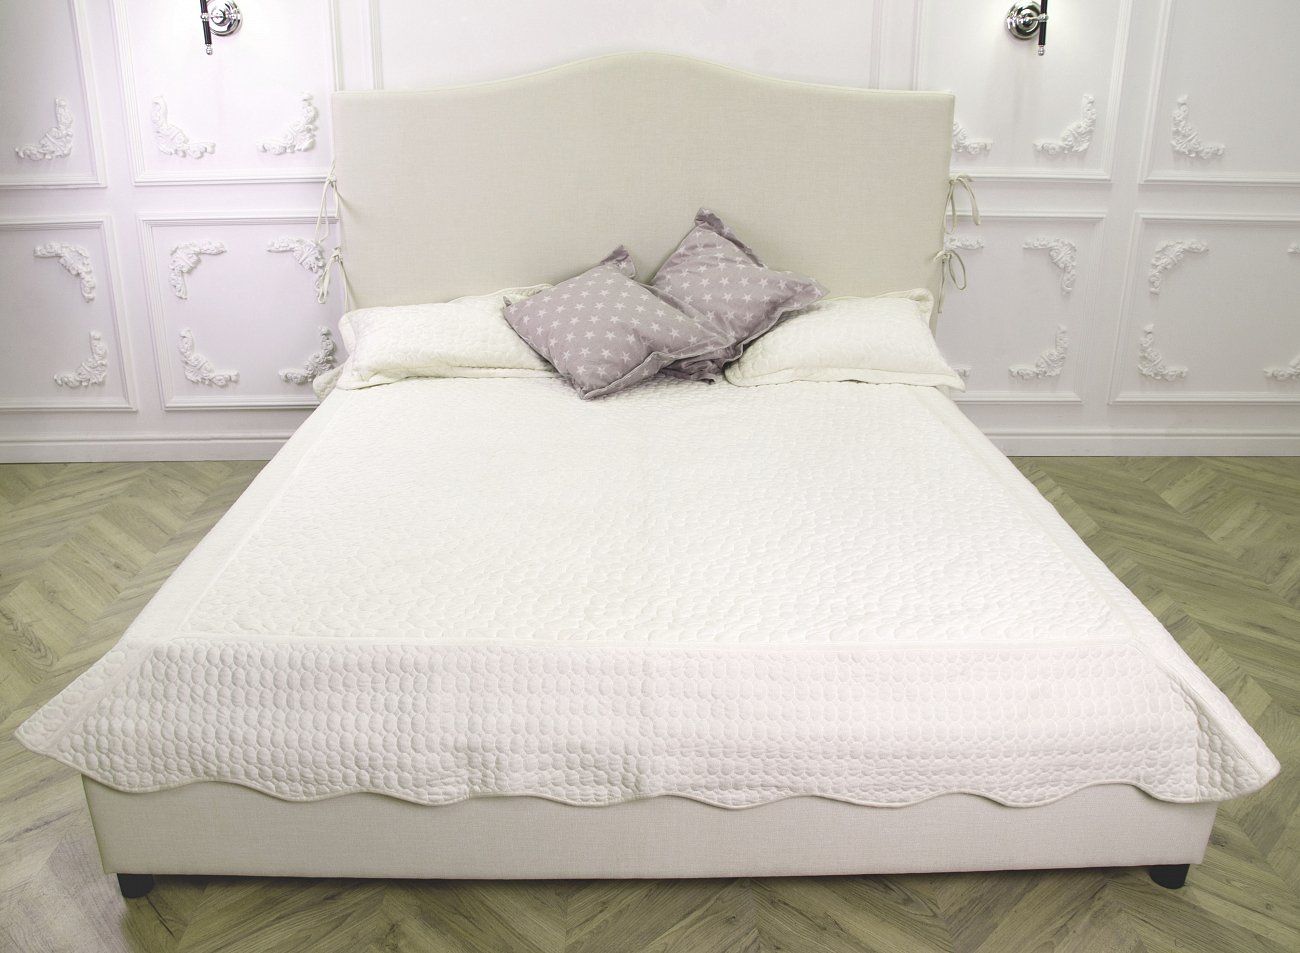 Double bed 160x200 white Eloise